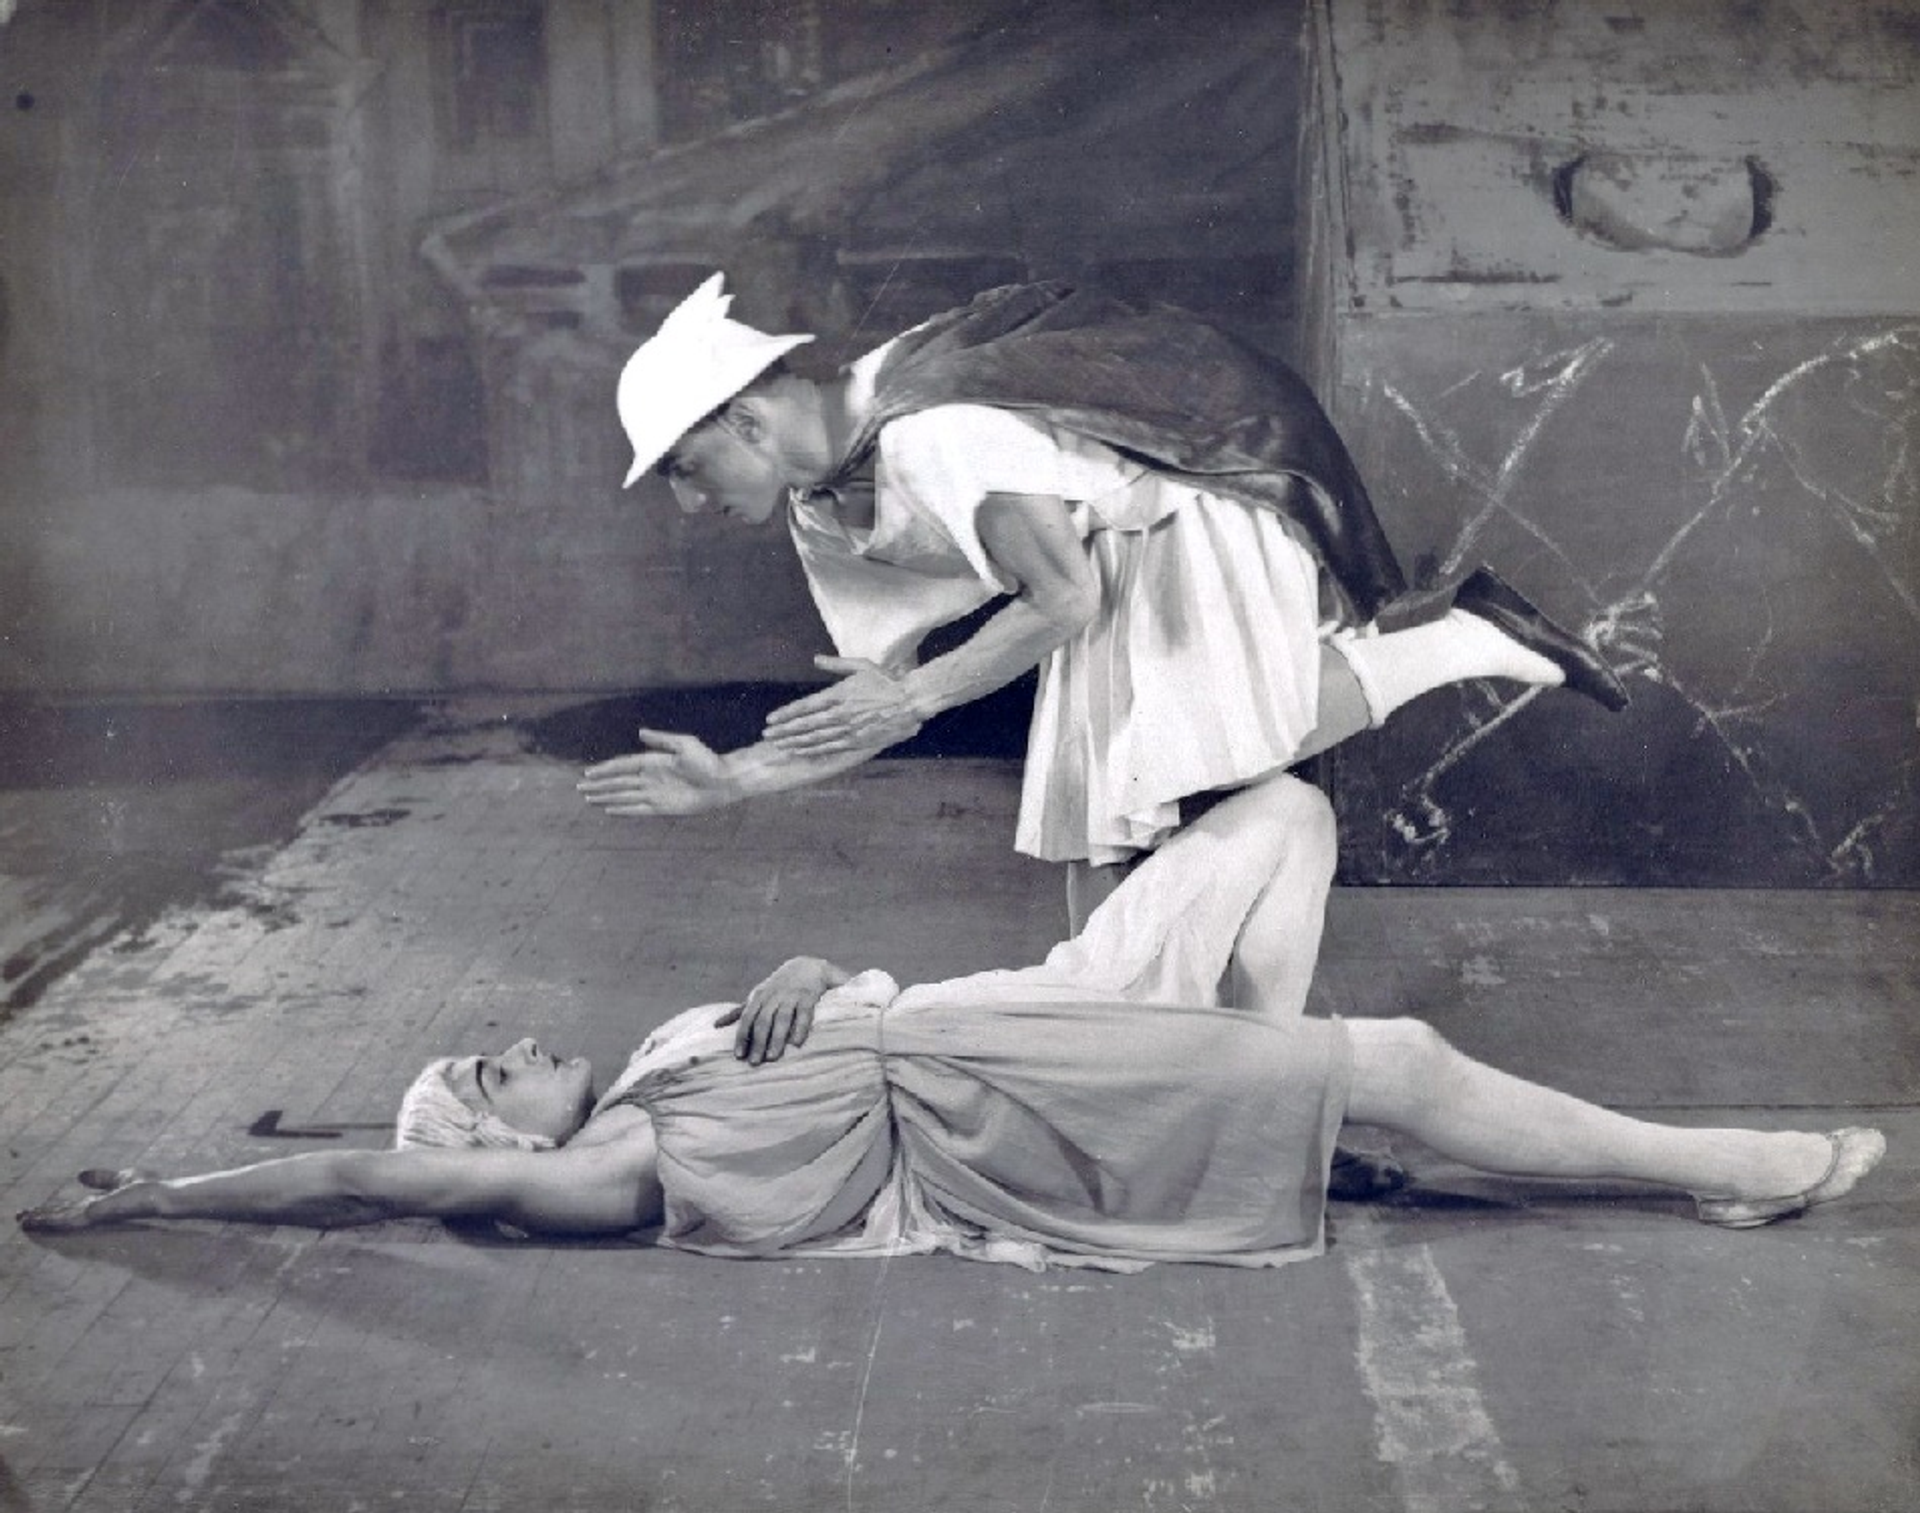 A monochrome image showing Massine being killed by Mercury, shown wearing a tunic and his signature hat. She is shown lying on the floor with her arms extended over her head.